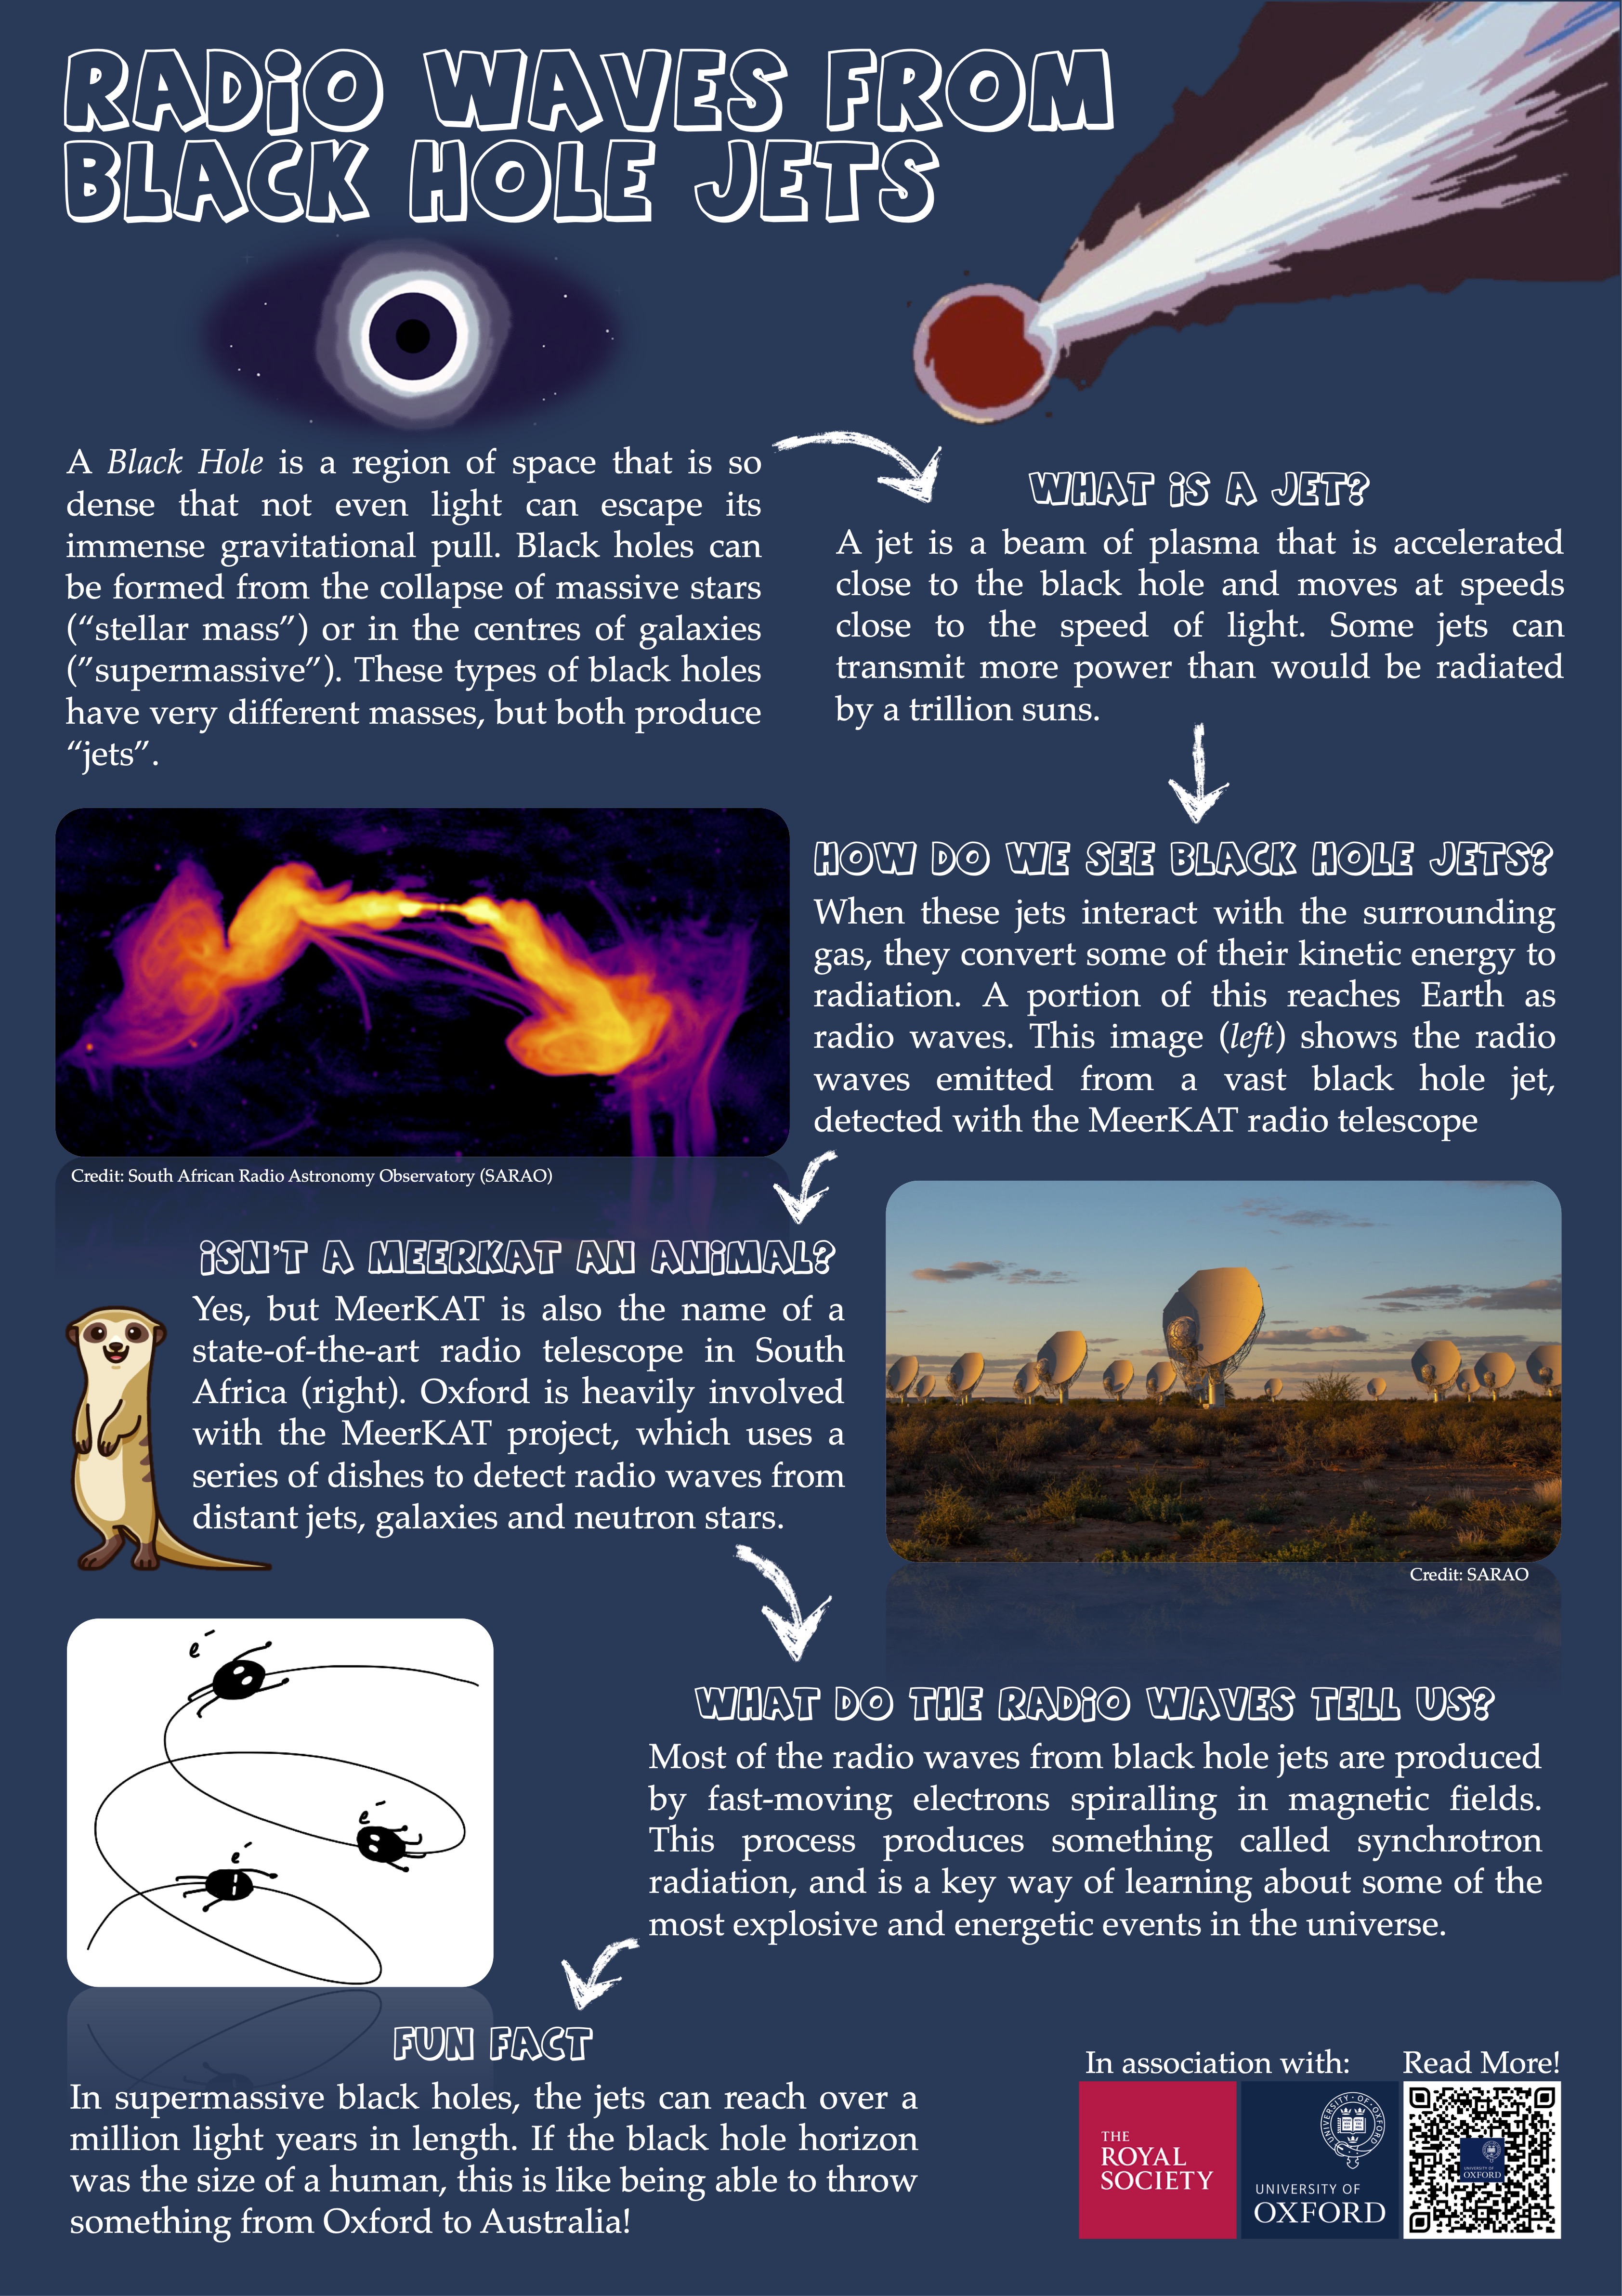 A poster about black hole jets.